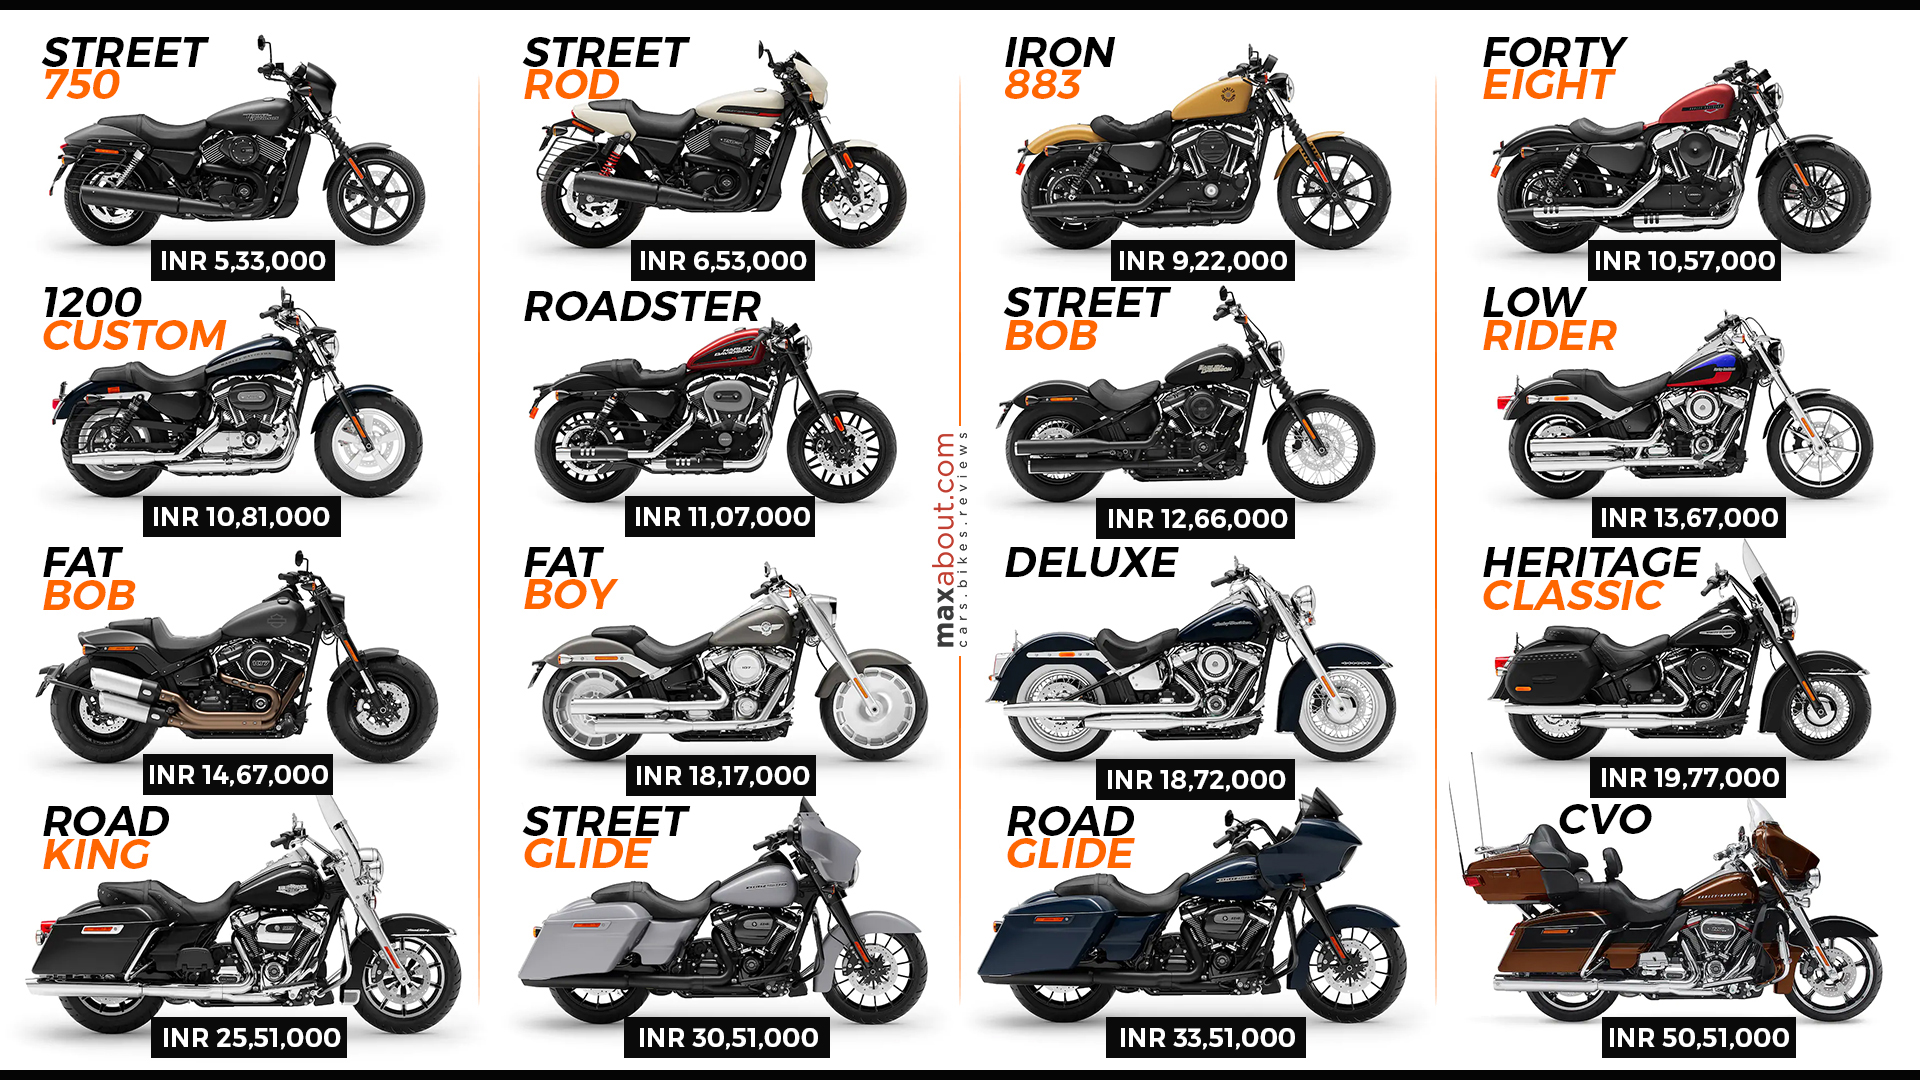 2019 Harley-Davidson Motorcycles Price List in India